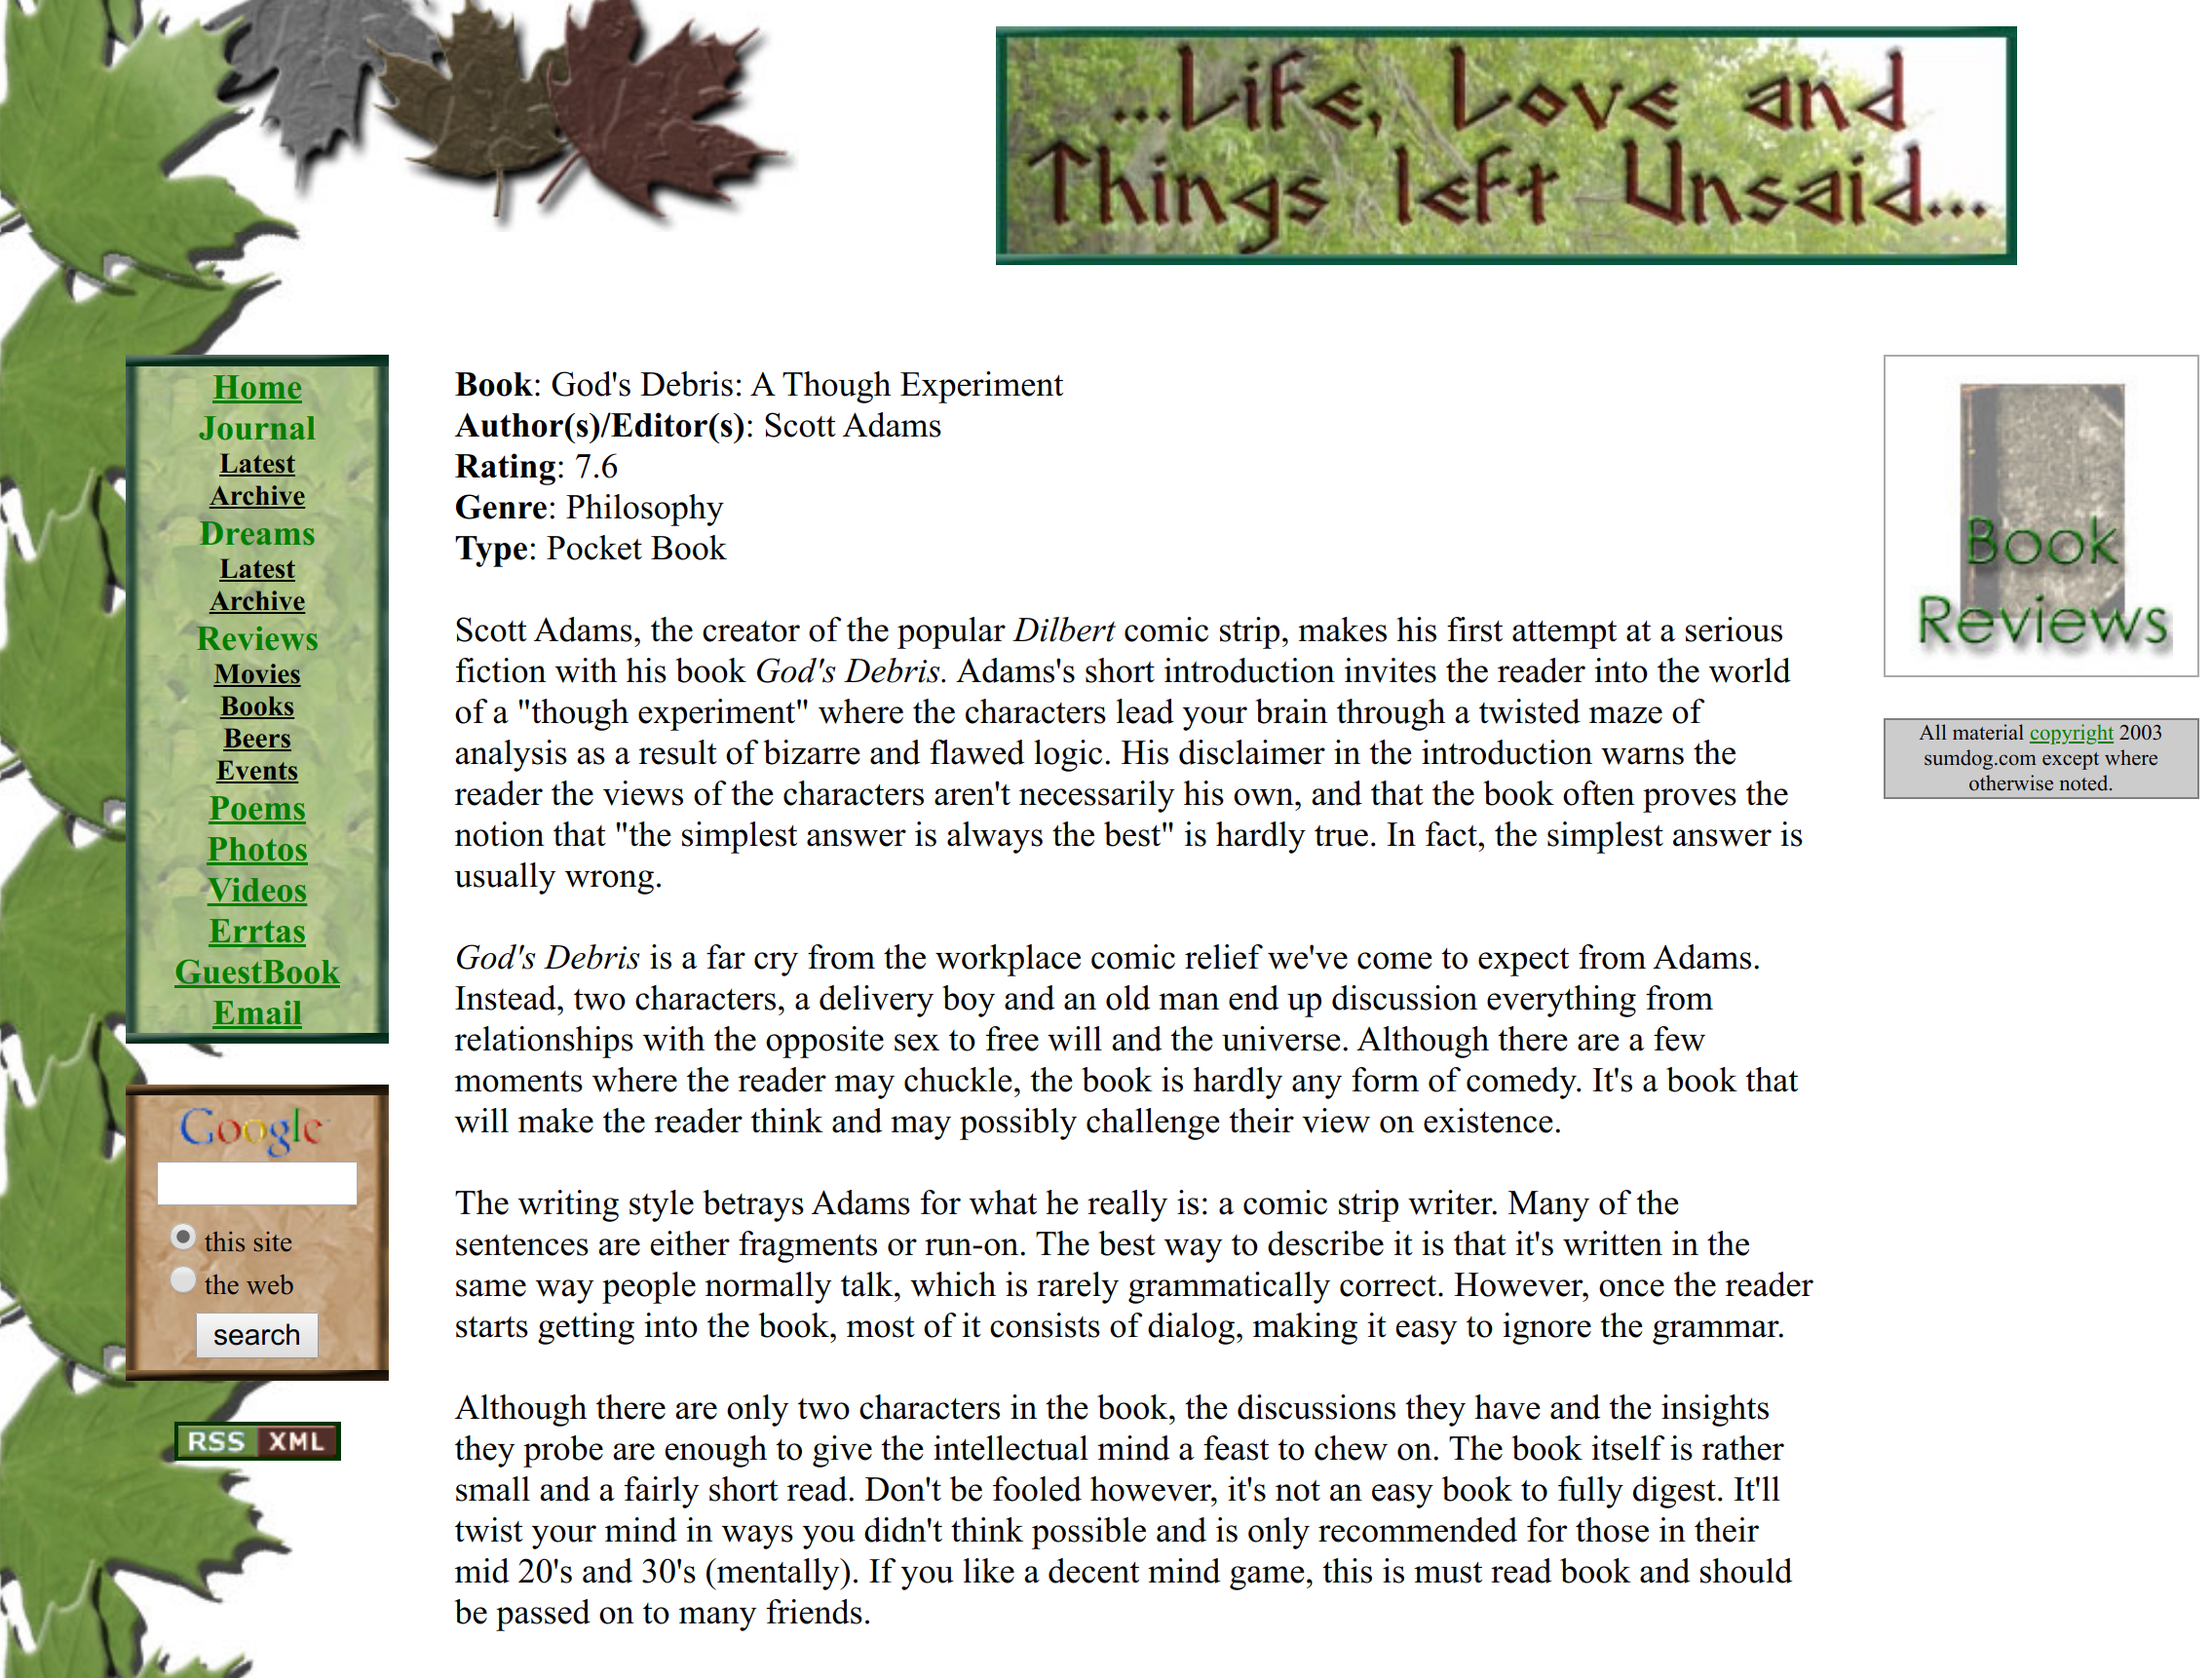 A book review from the second version of my personal website